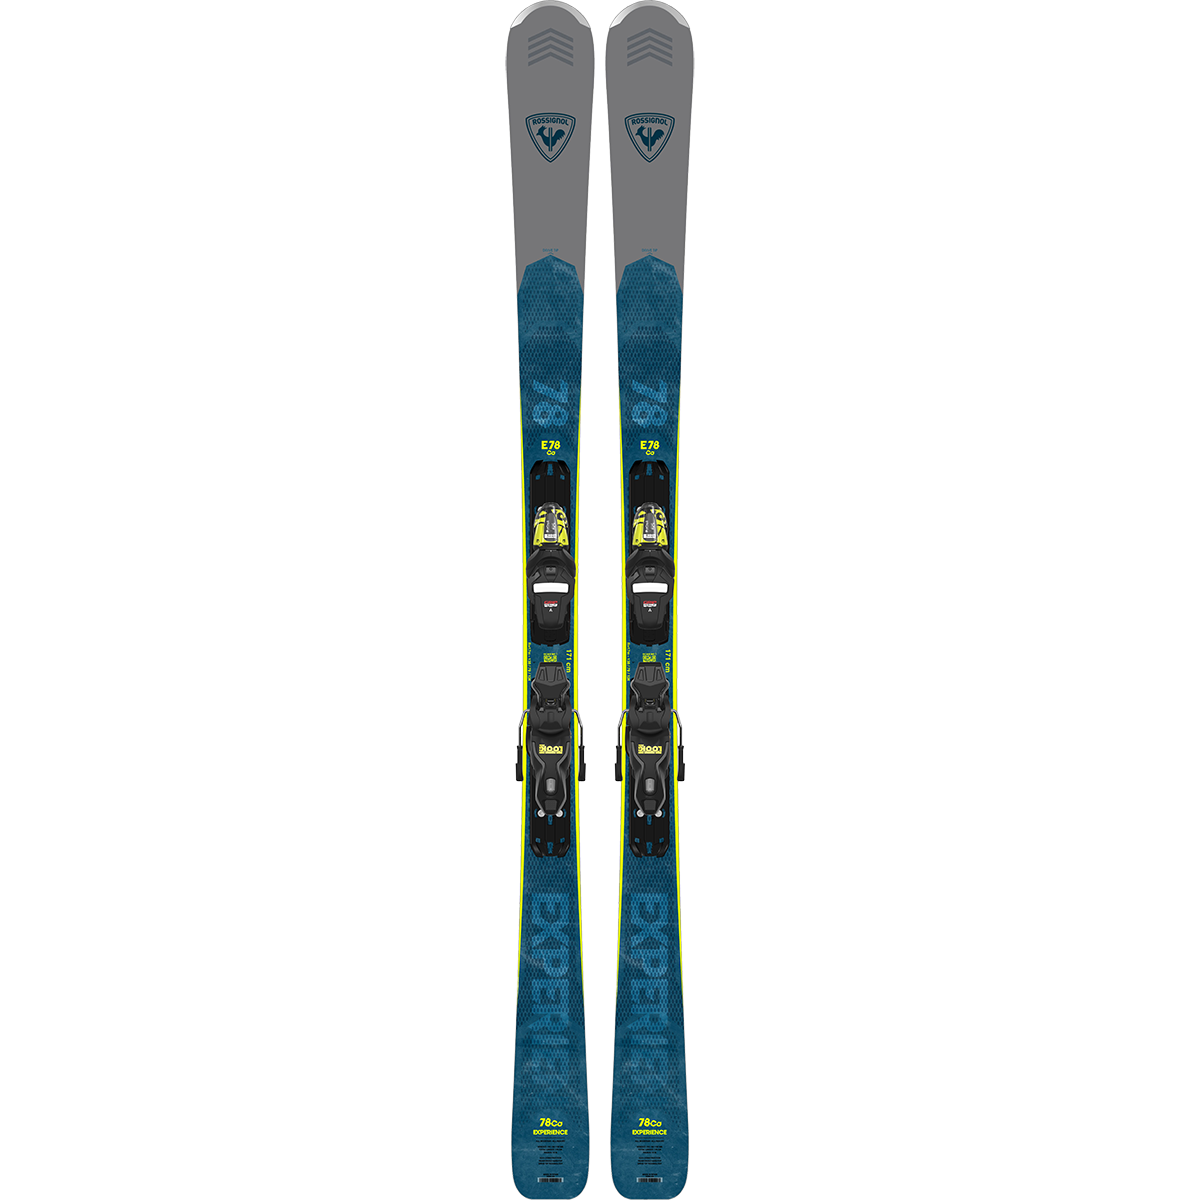 Experience 78 Carbon Ski with XP11 Bindings alternate view